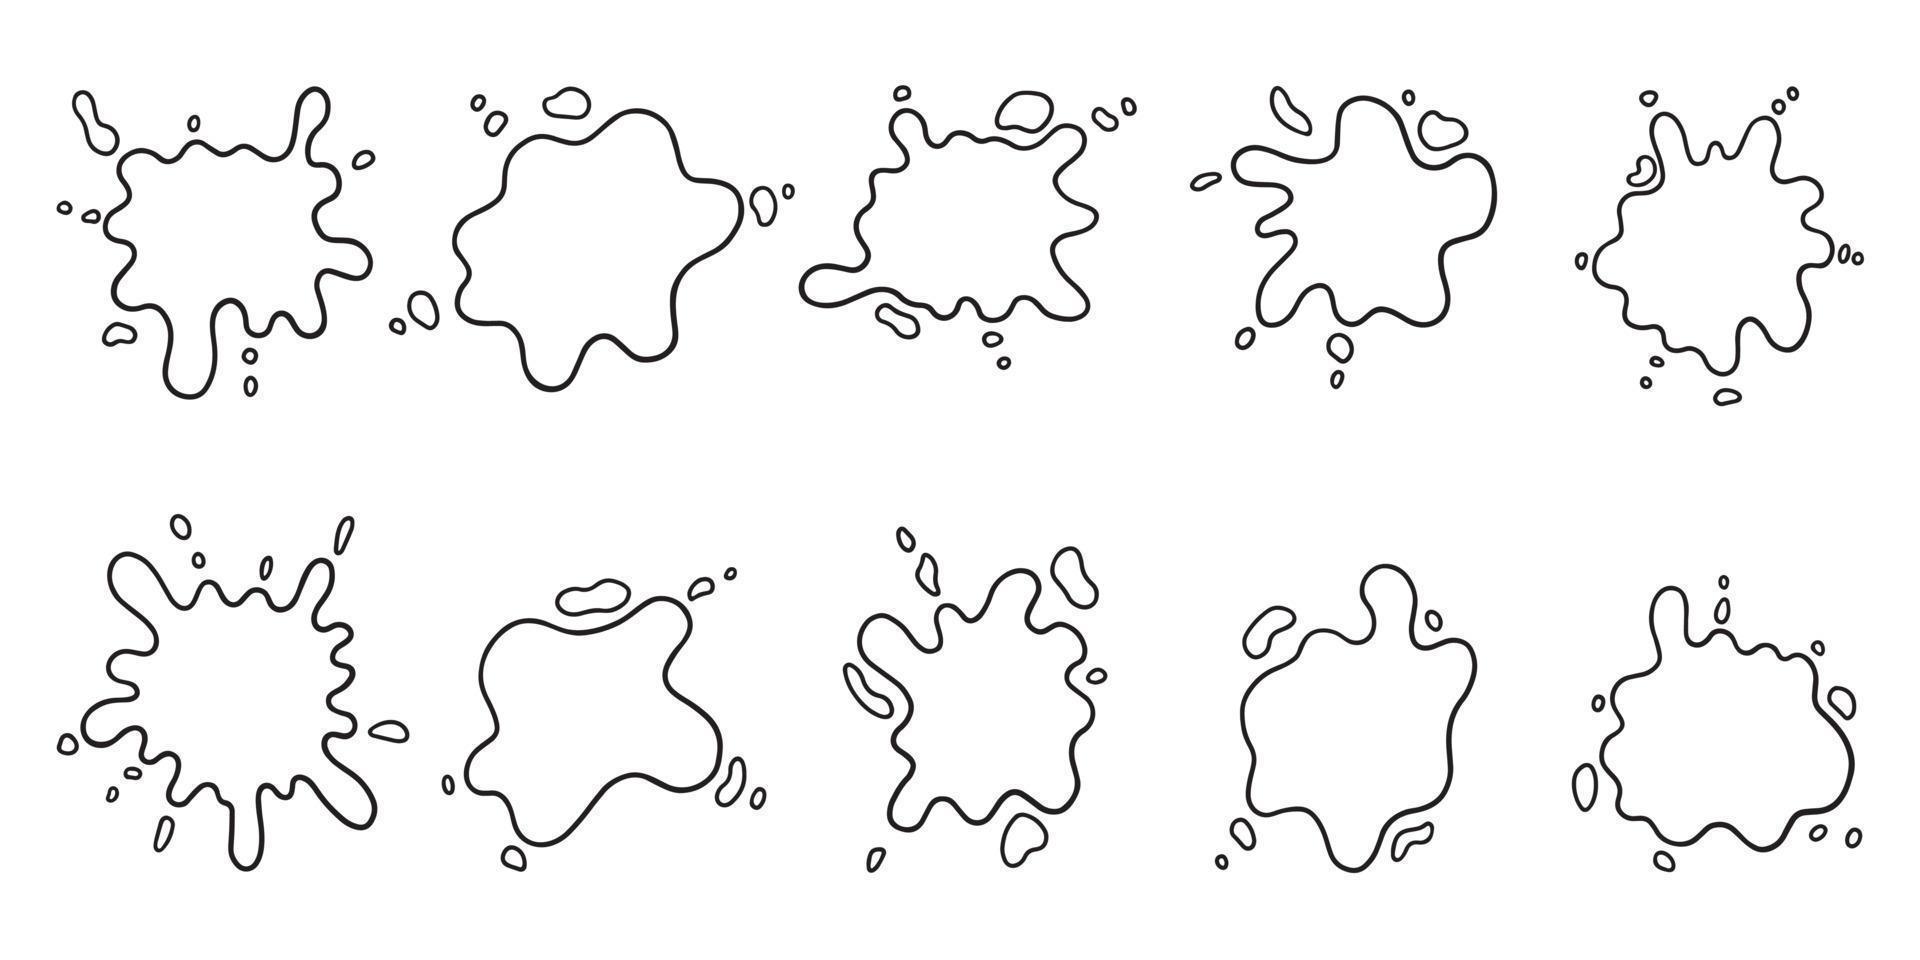 Hand drawn set of paint splashes doodle. Different shapes of paint splatter and drops, ink blobs . Vector illustration isolated on white background.